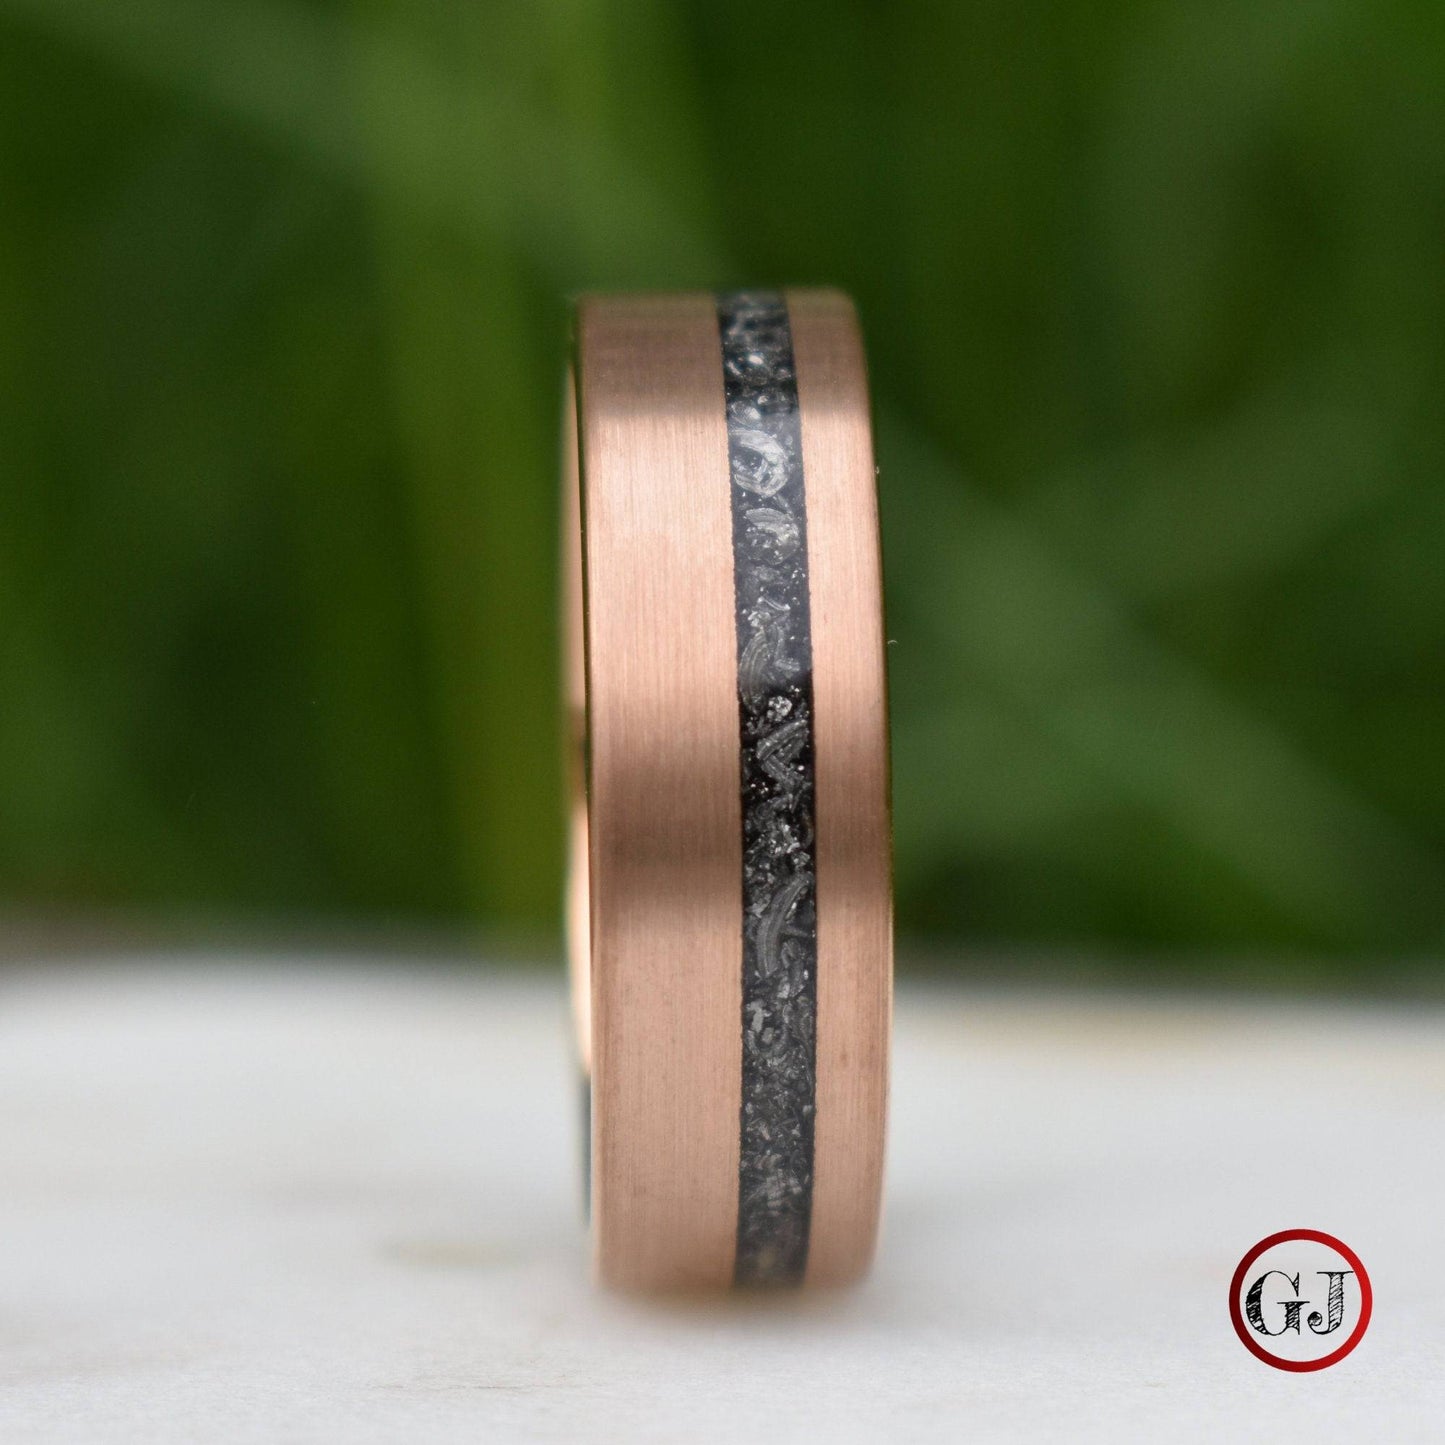 Tungsten 8mm Ring Rose Gold with Black Druzy Quartz and Iron Inlay, Mens Ring, Mens Wedding Band - Tungsten Titans